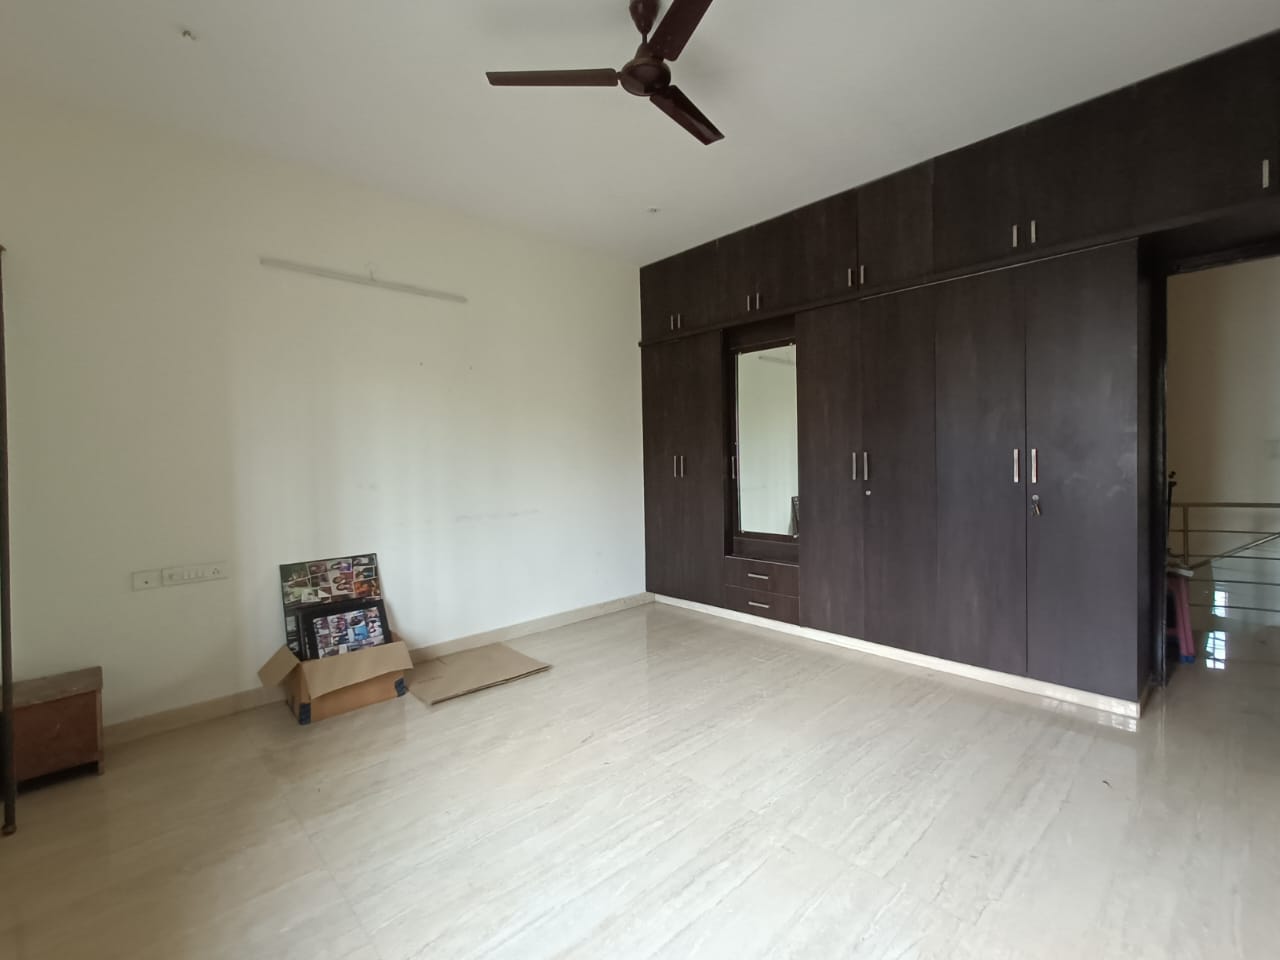 2 BHK Residential Apartment for Lease Only at JAM-6428 in Basapura